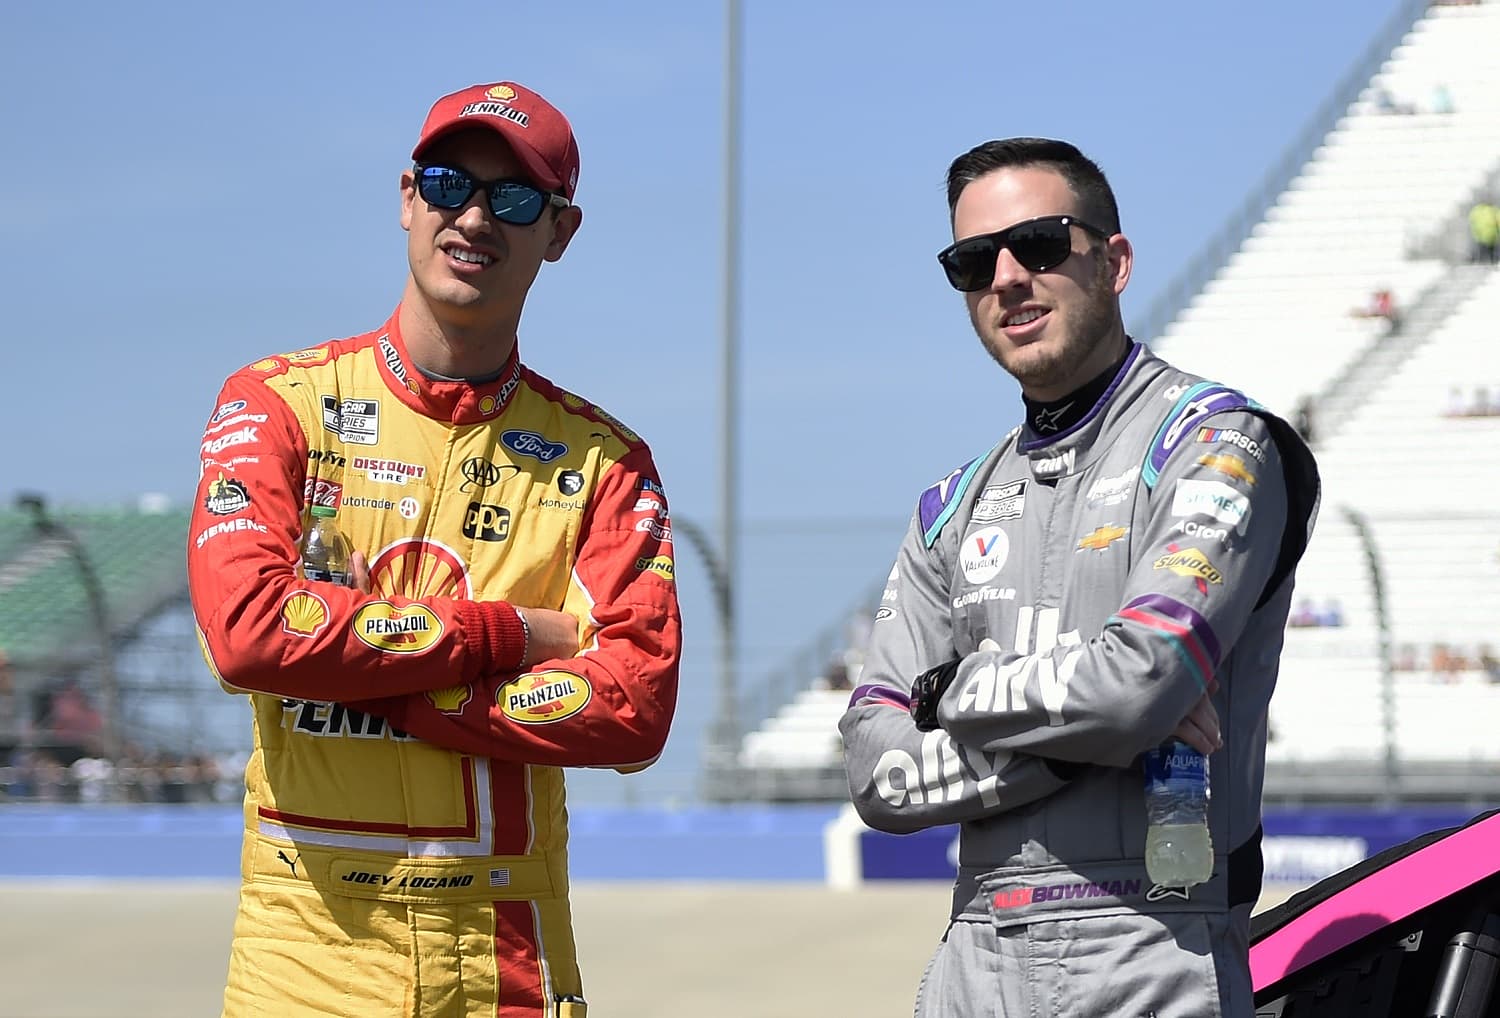 Joey Logano and Alex Bowman Have a Really Awkward Issue Considering Their Occupation